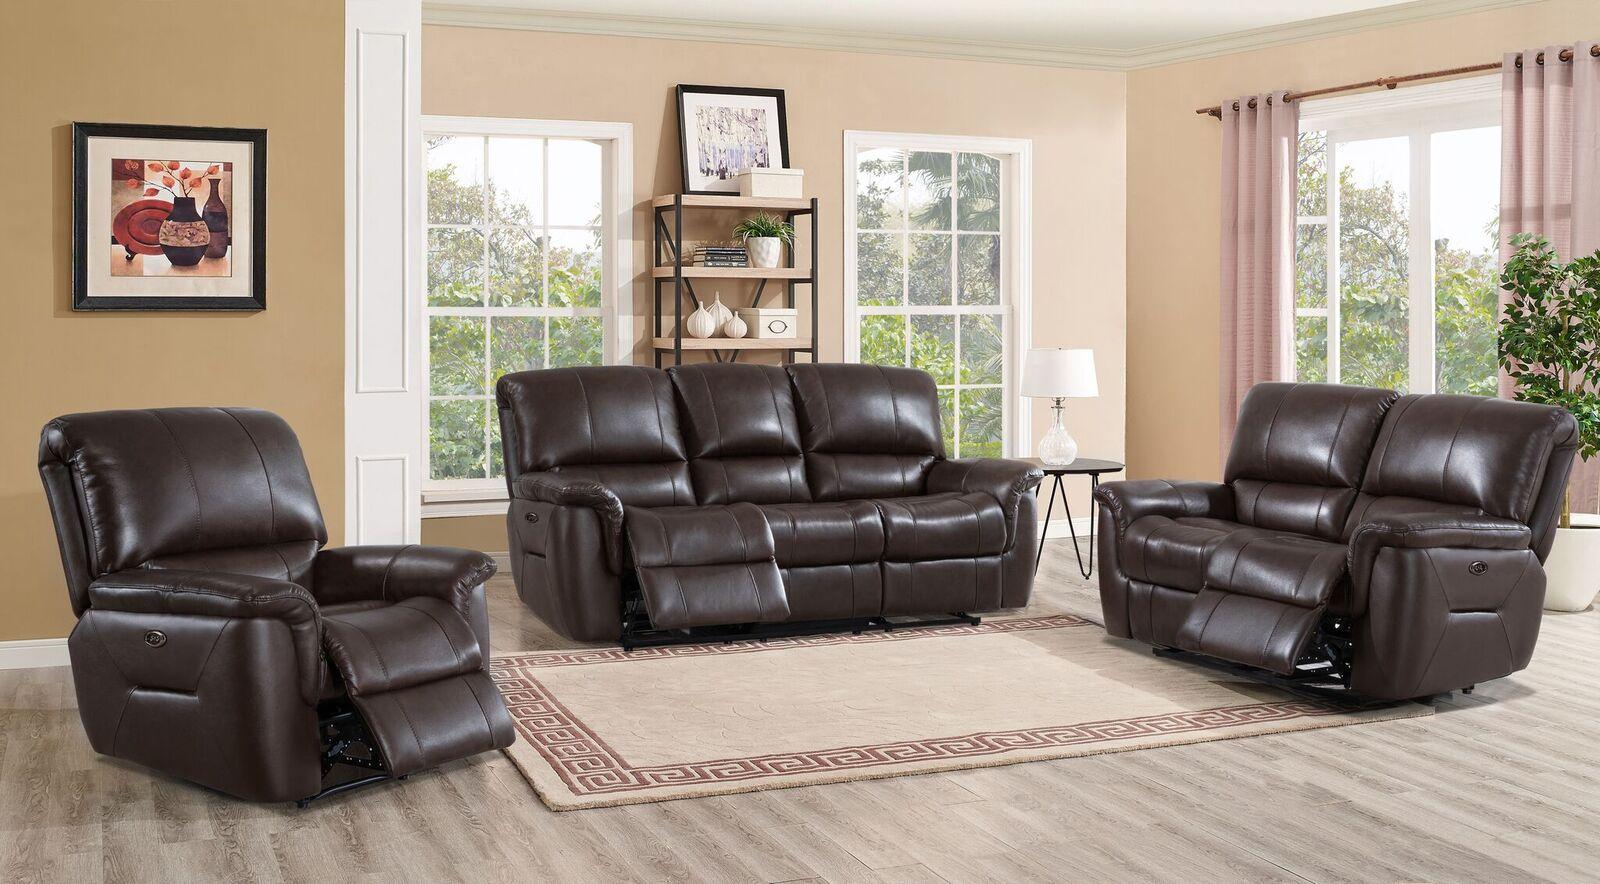 Top Grain Leather Power Reclining Sectional Sofa Bidwell HYDELINE ...